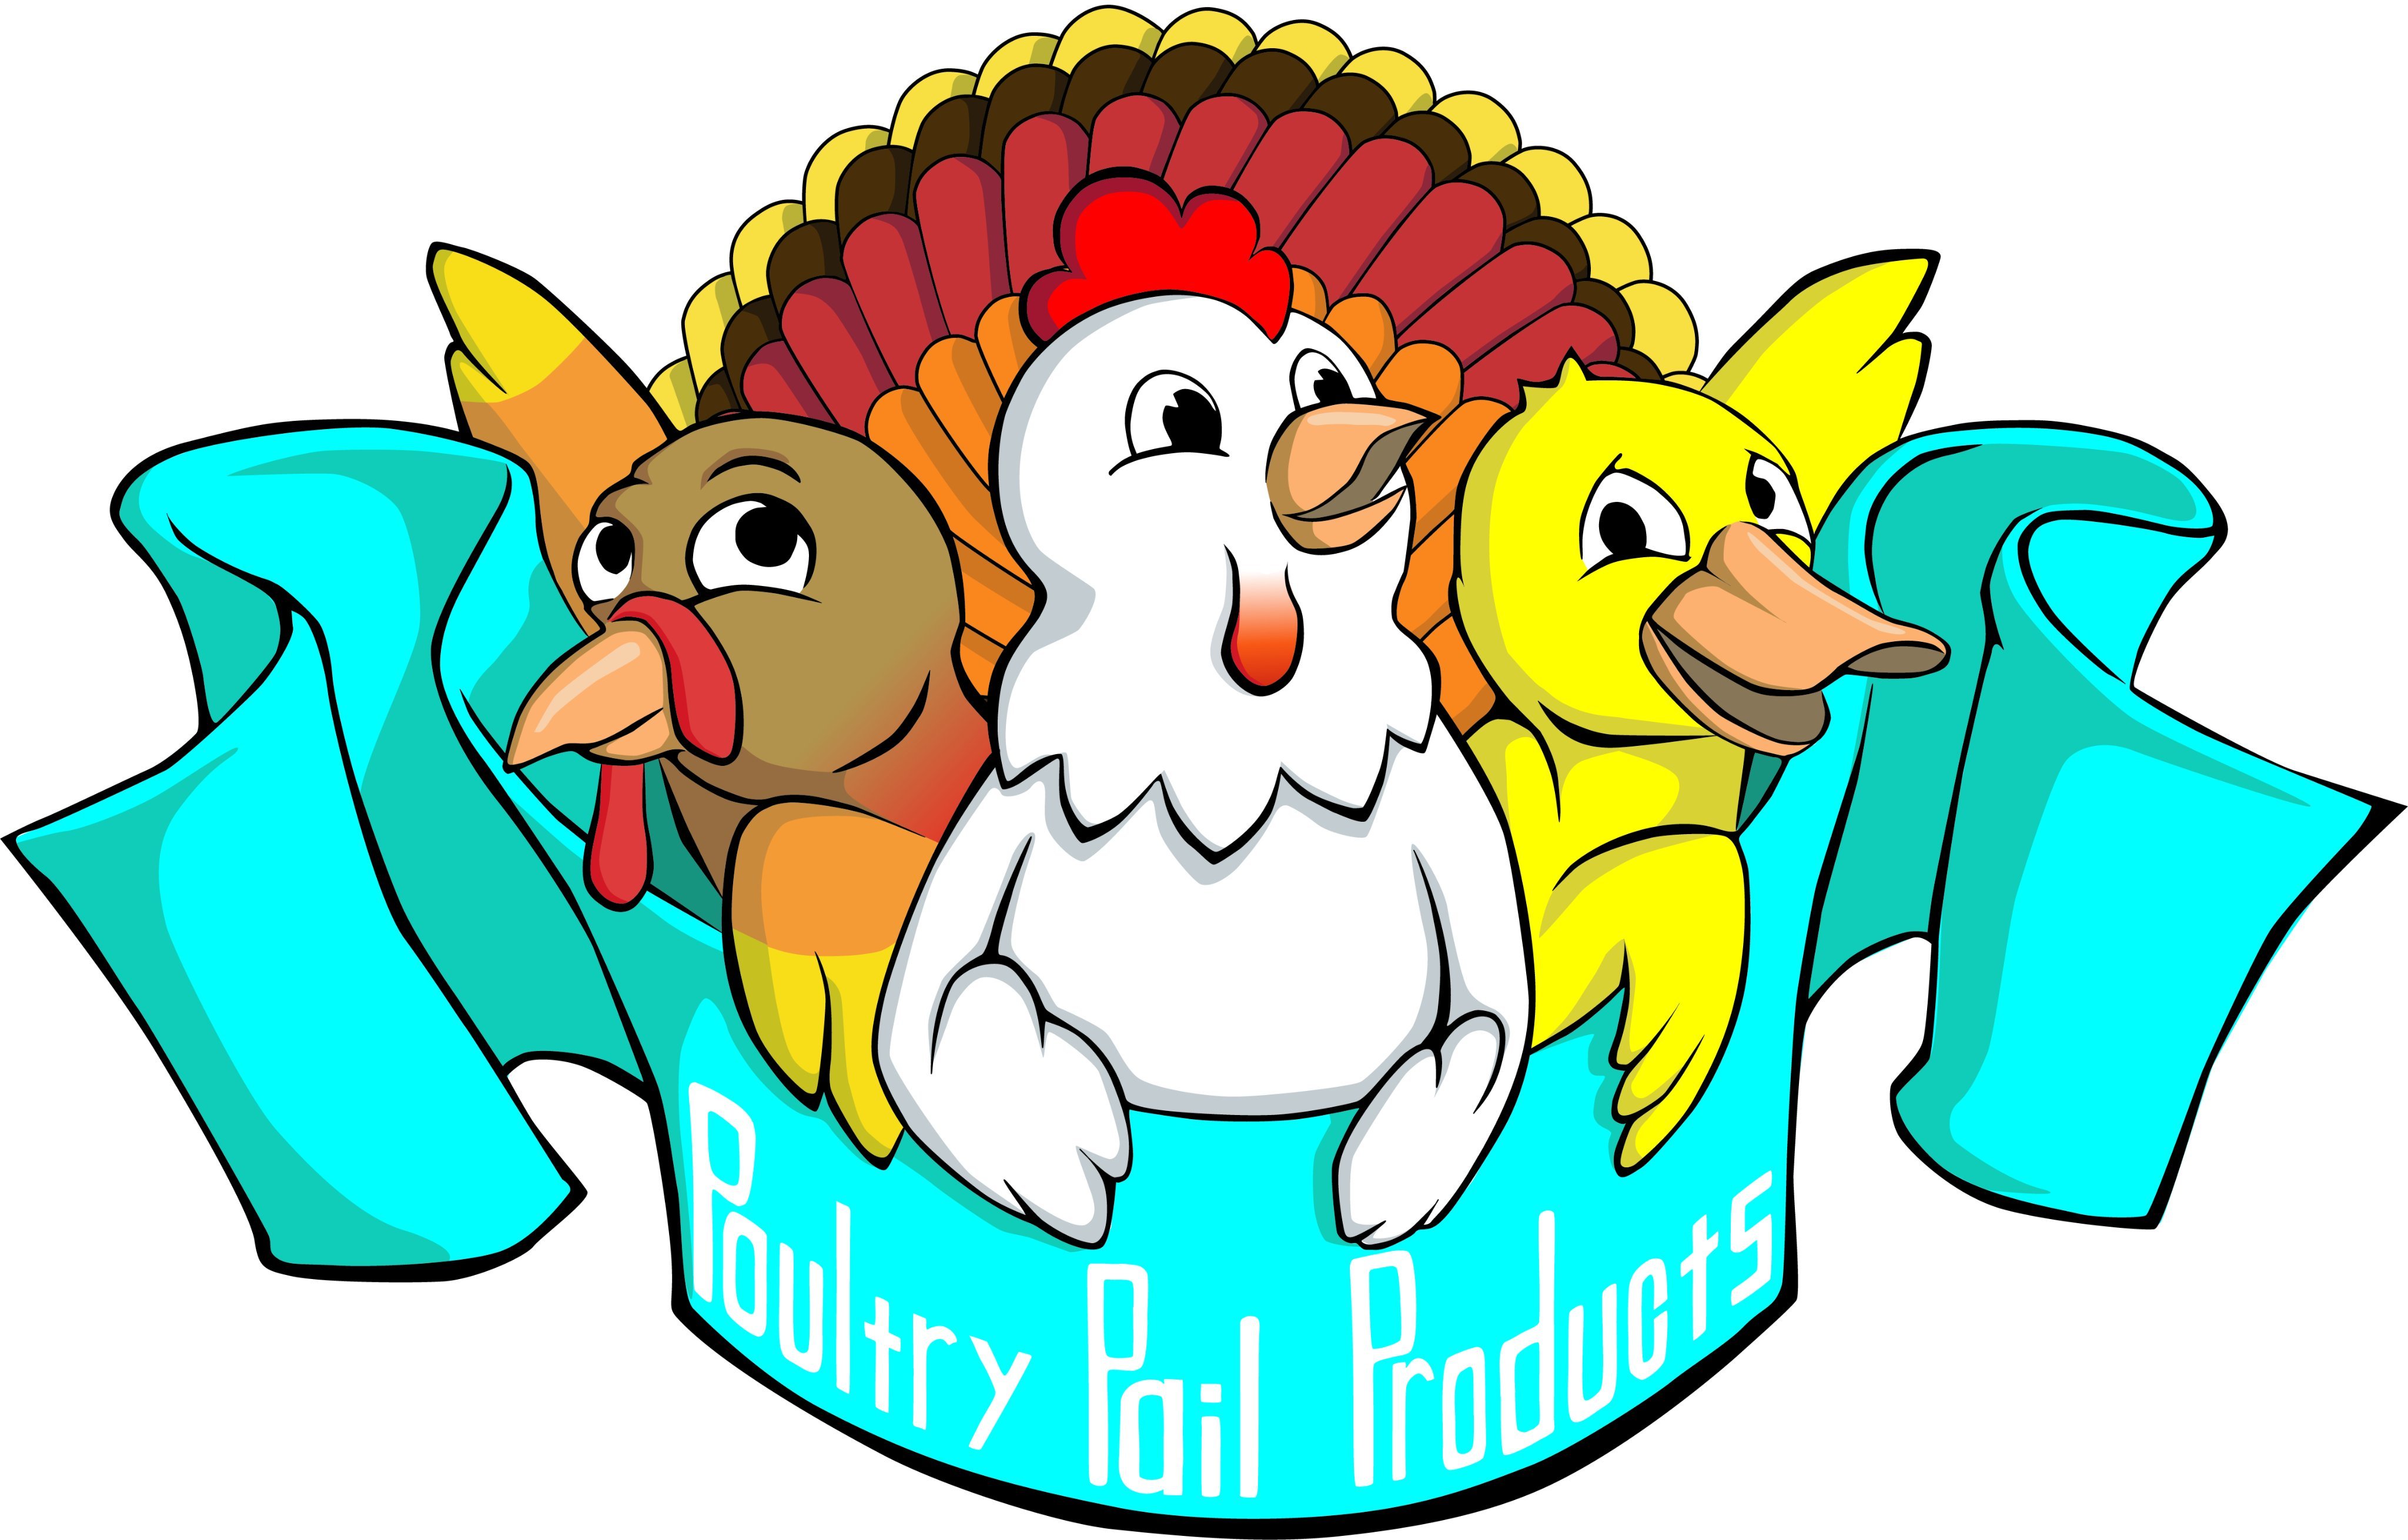 Poultry Pail Products is a brand new business! We sell chicken feeders for poultry. Check us out @ https://t.co/MuVnP9v8Fj